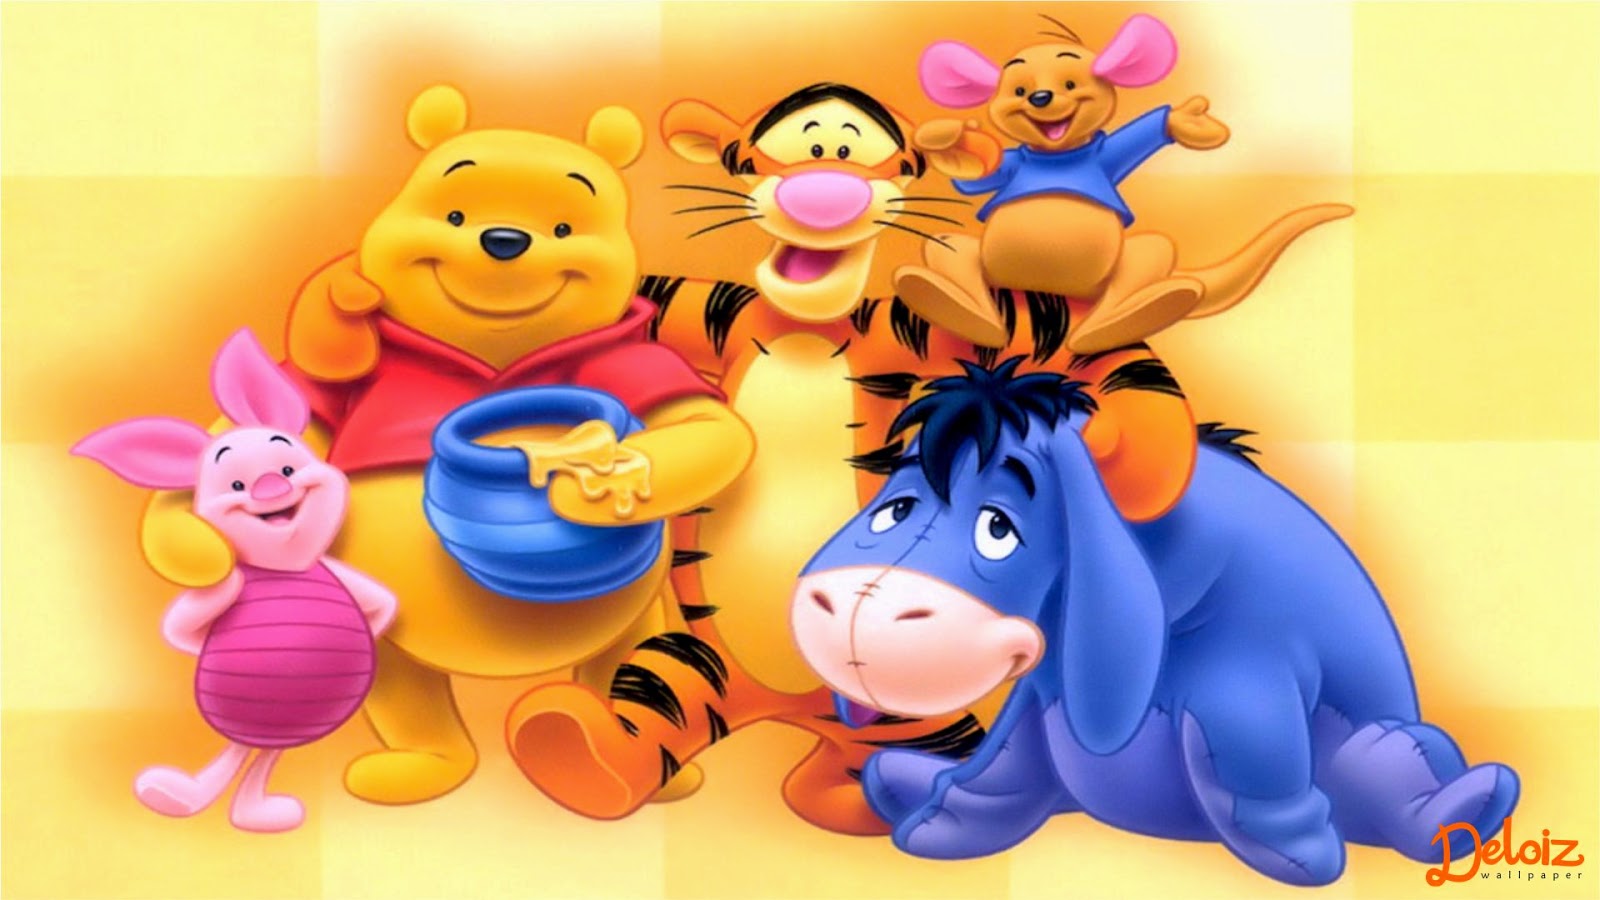  WALLPAPER  ANDROID IPHONE Wallpaper  Winnie The Pooh HD